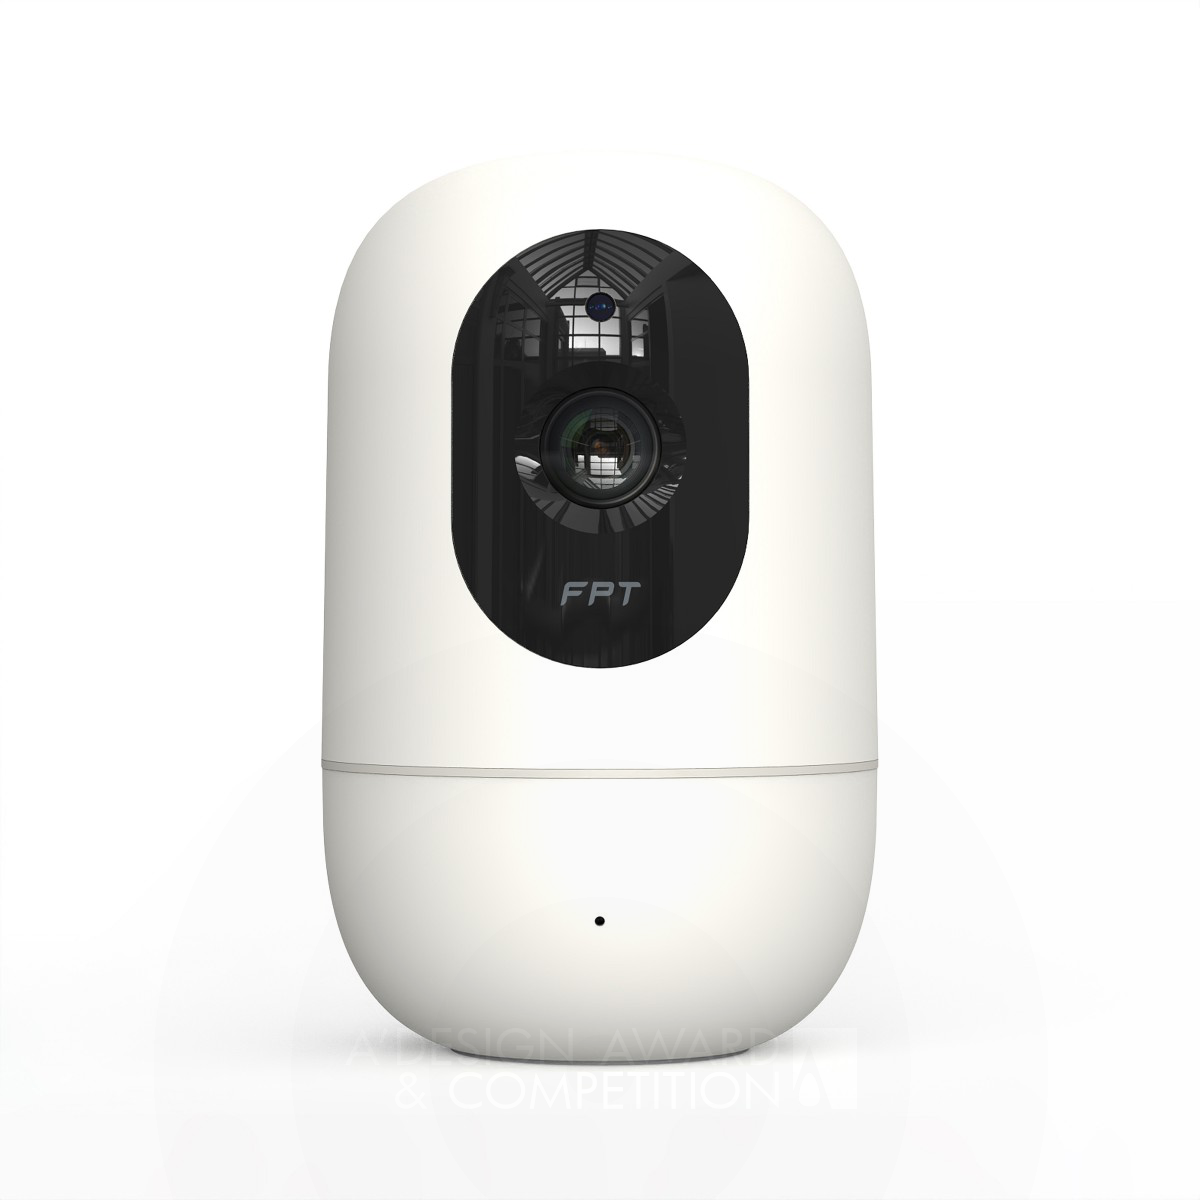 FPT Camera Play Home Security by Fpt Camera